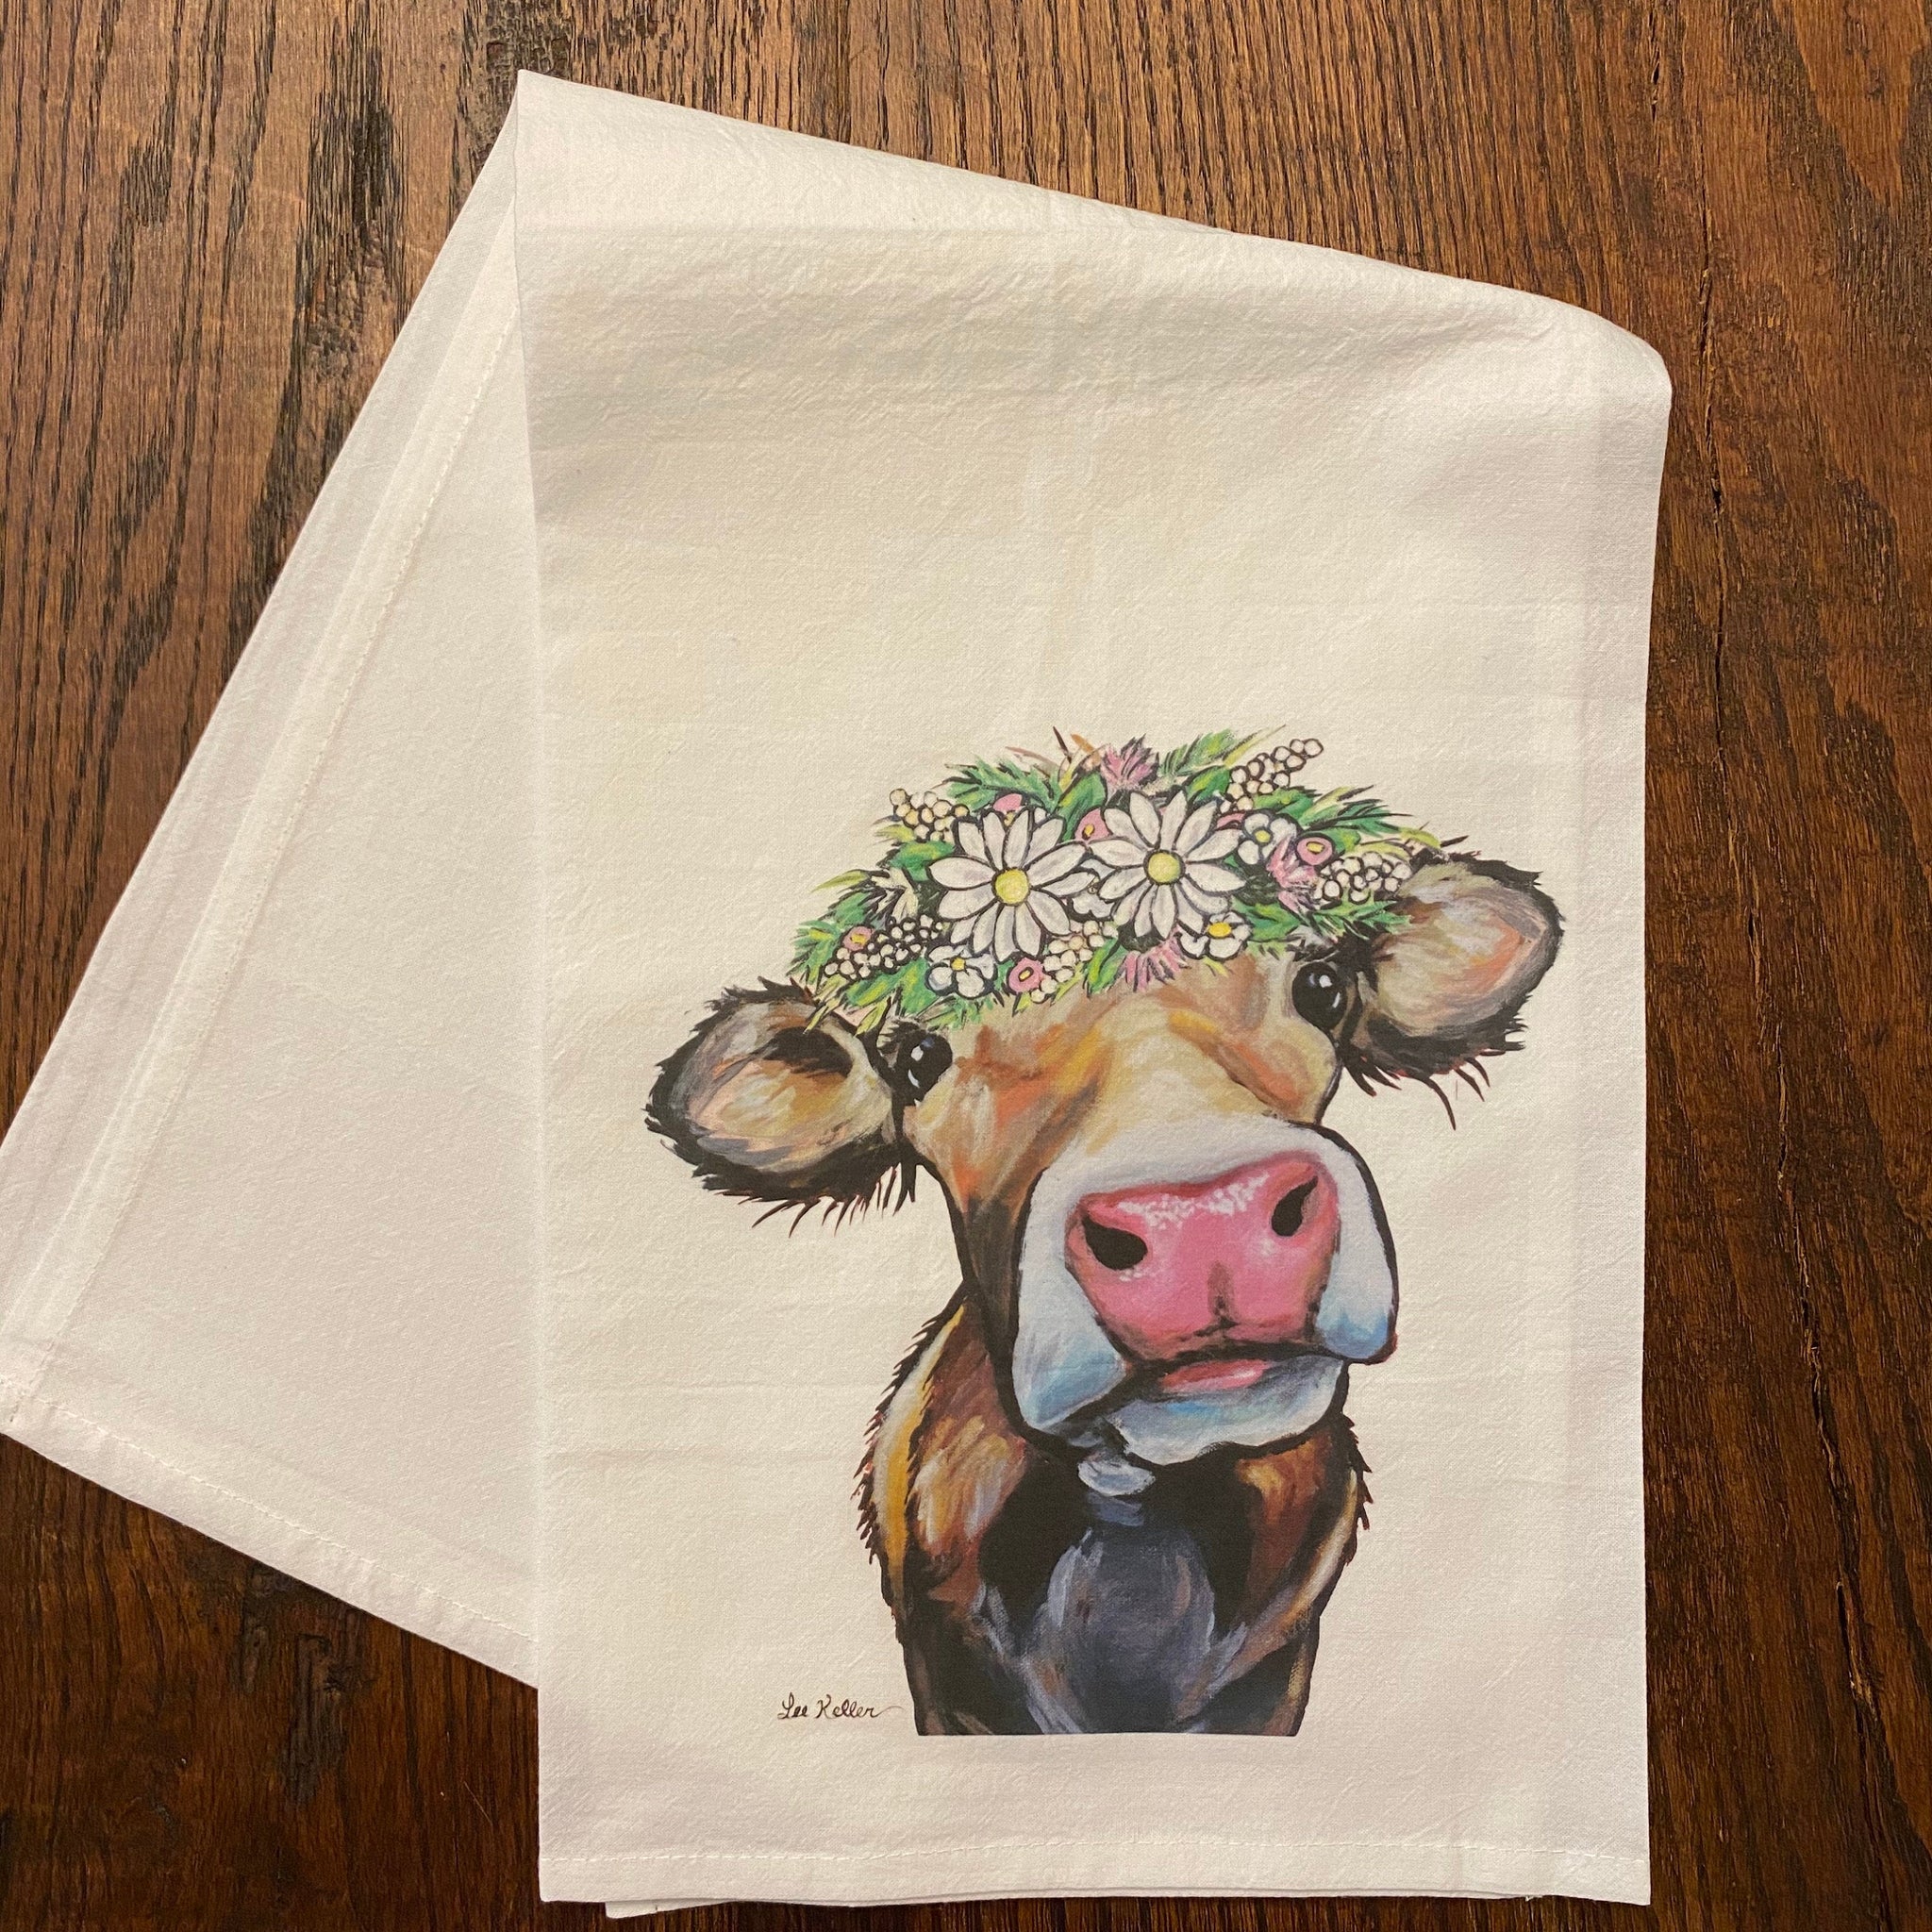 Hand Towels, Milk Cow Printed Dishcloth, Farmhouse Rustic Style